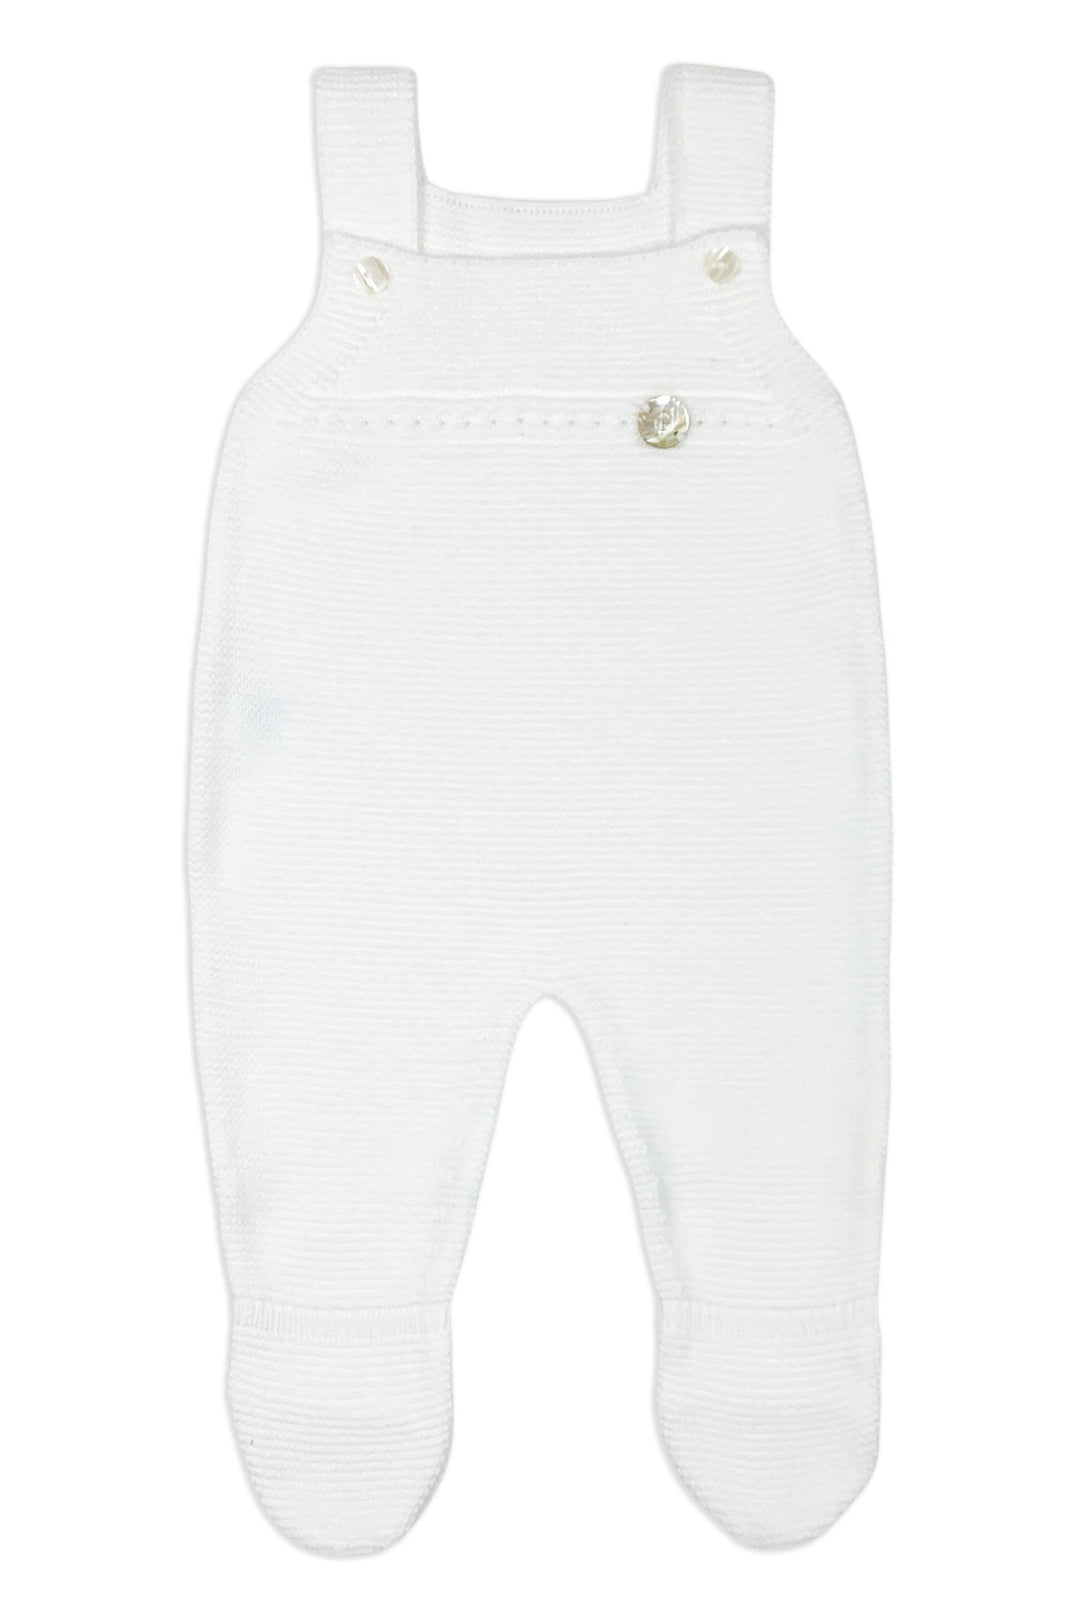 Granlei "Rowen" White Knitted Dungarees | Millie and John